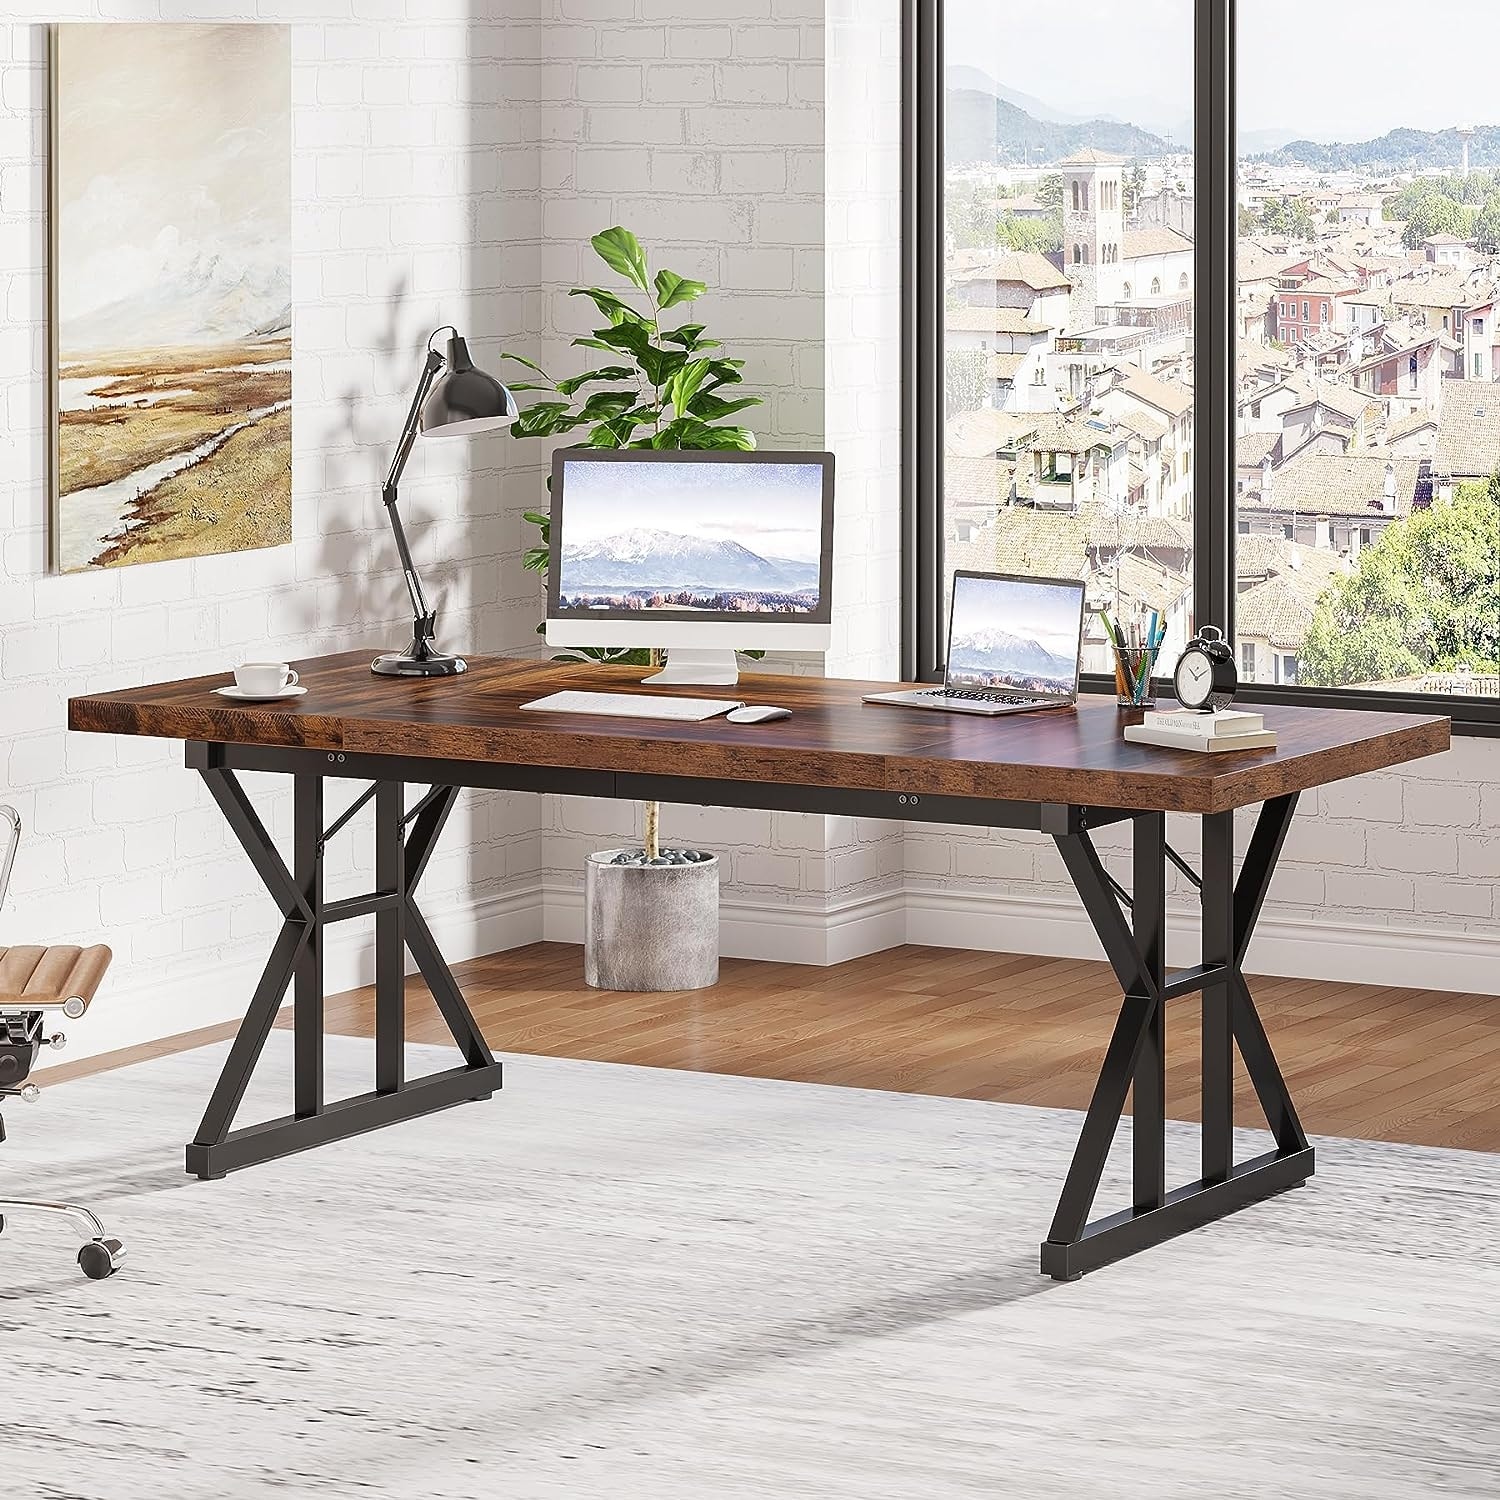 https://ak1.ostkcdn.com/images/products/is/images/direct/9405c4cde397871b28006f2299e5aa2662c39b21/70.8-Inch-Executive-Desk%2C-Large-Computer-Office-Desk-Workstation.jpg